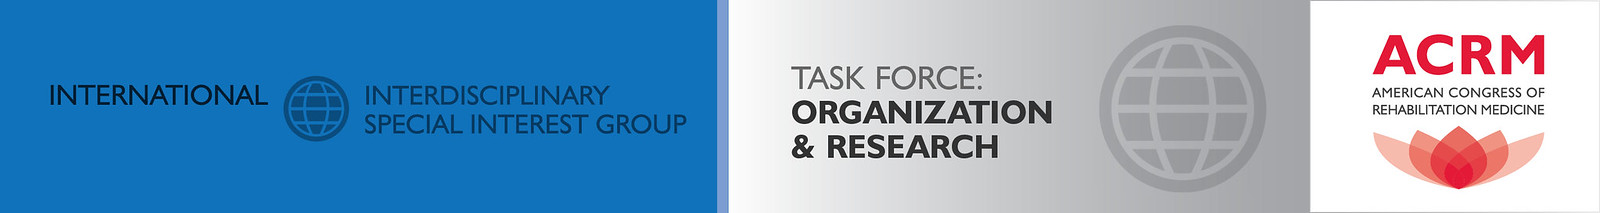 ACRM Organization Research Task Force header